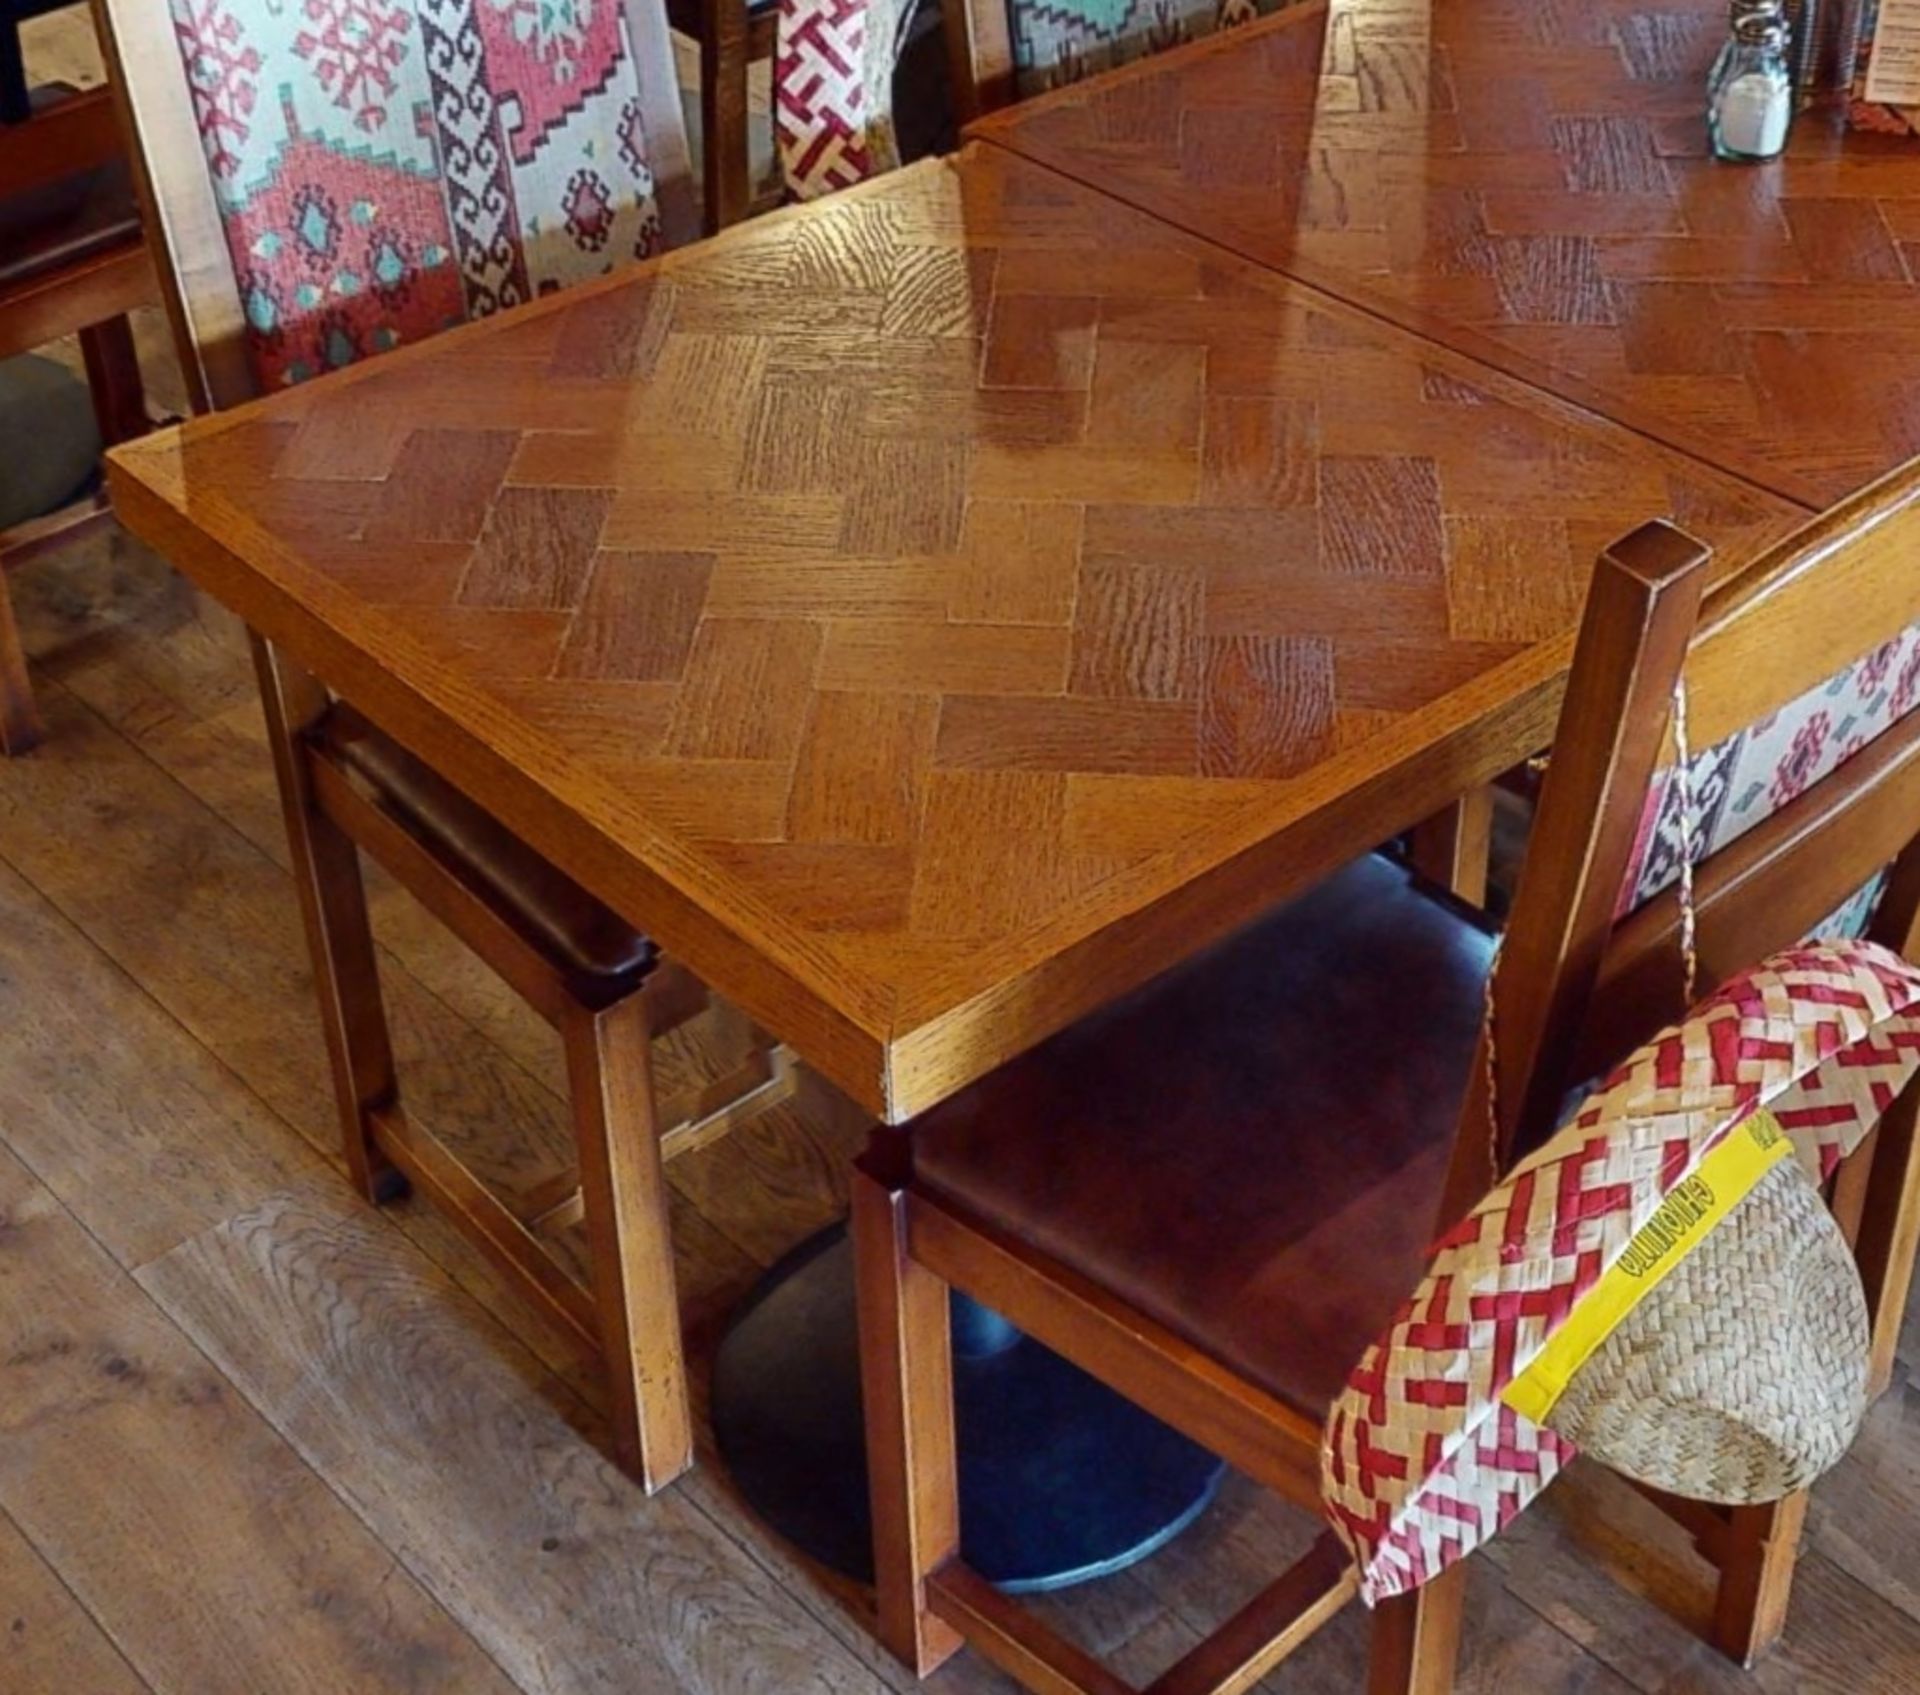 2 x Two Seater Restaurant Dining Tables With Parquet Style Tops and Cast Iron Bases - Image 3 of 9